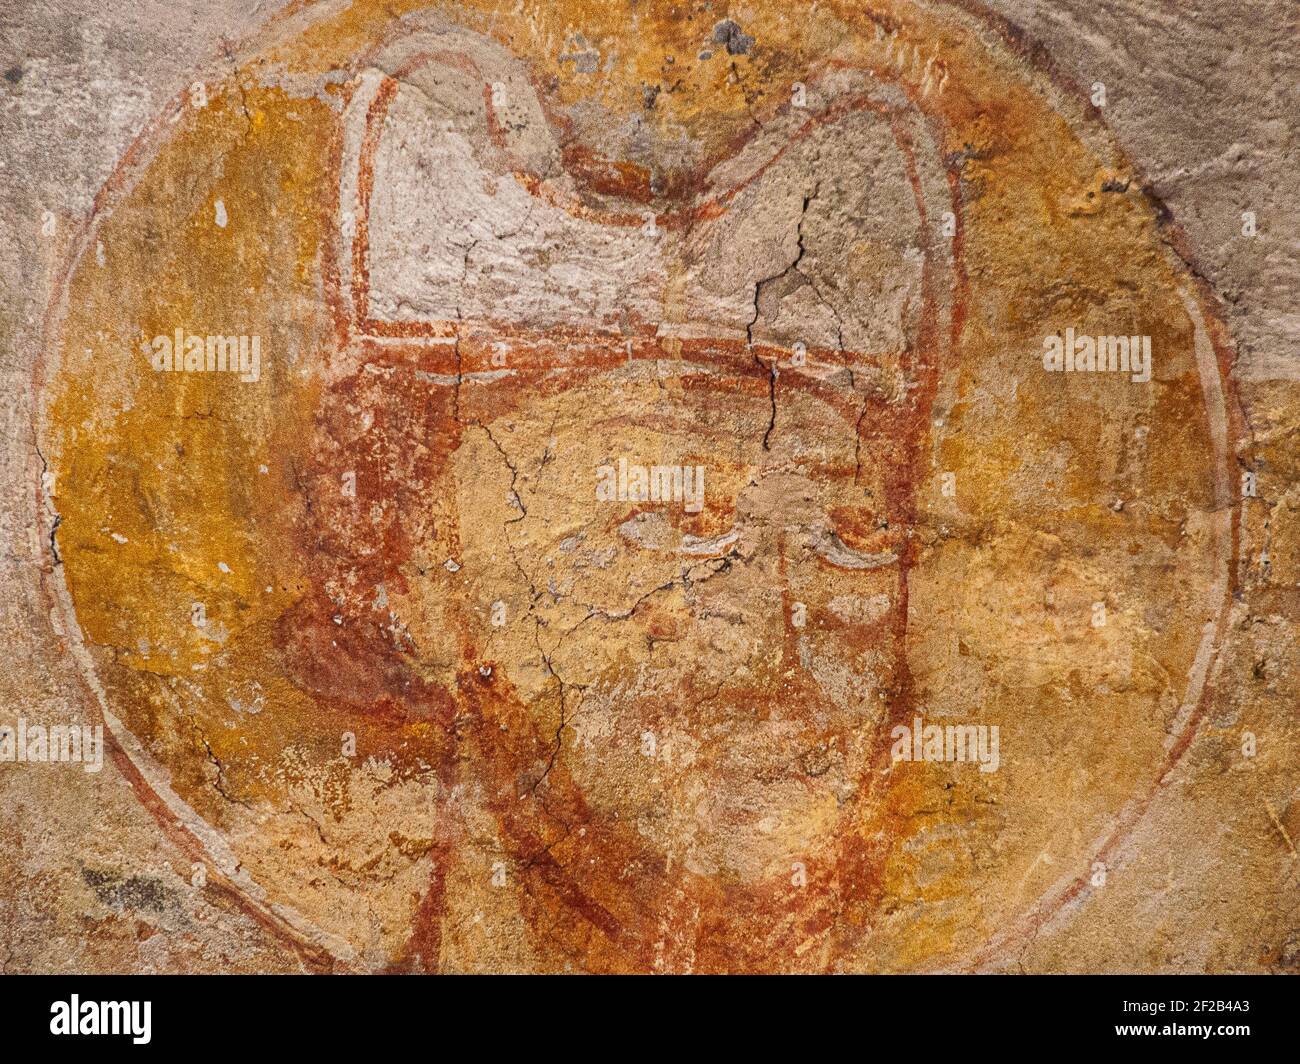 a bishop´s mitre with two horns, a romanesque wall-painting from the 1100s in Övraby church, Sweden, November 6, 2009 Stock Photo